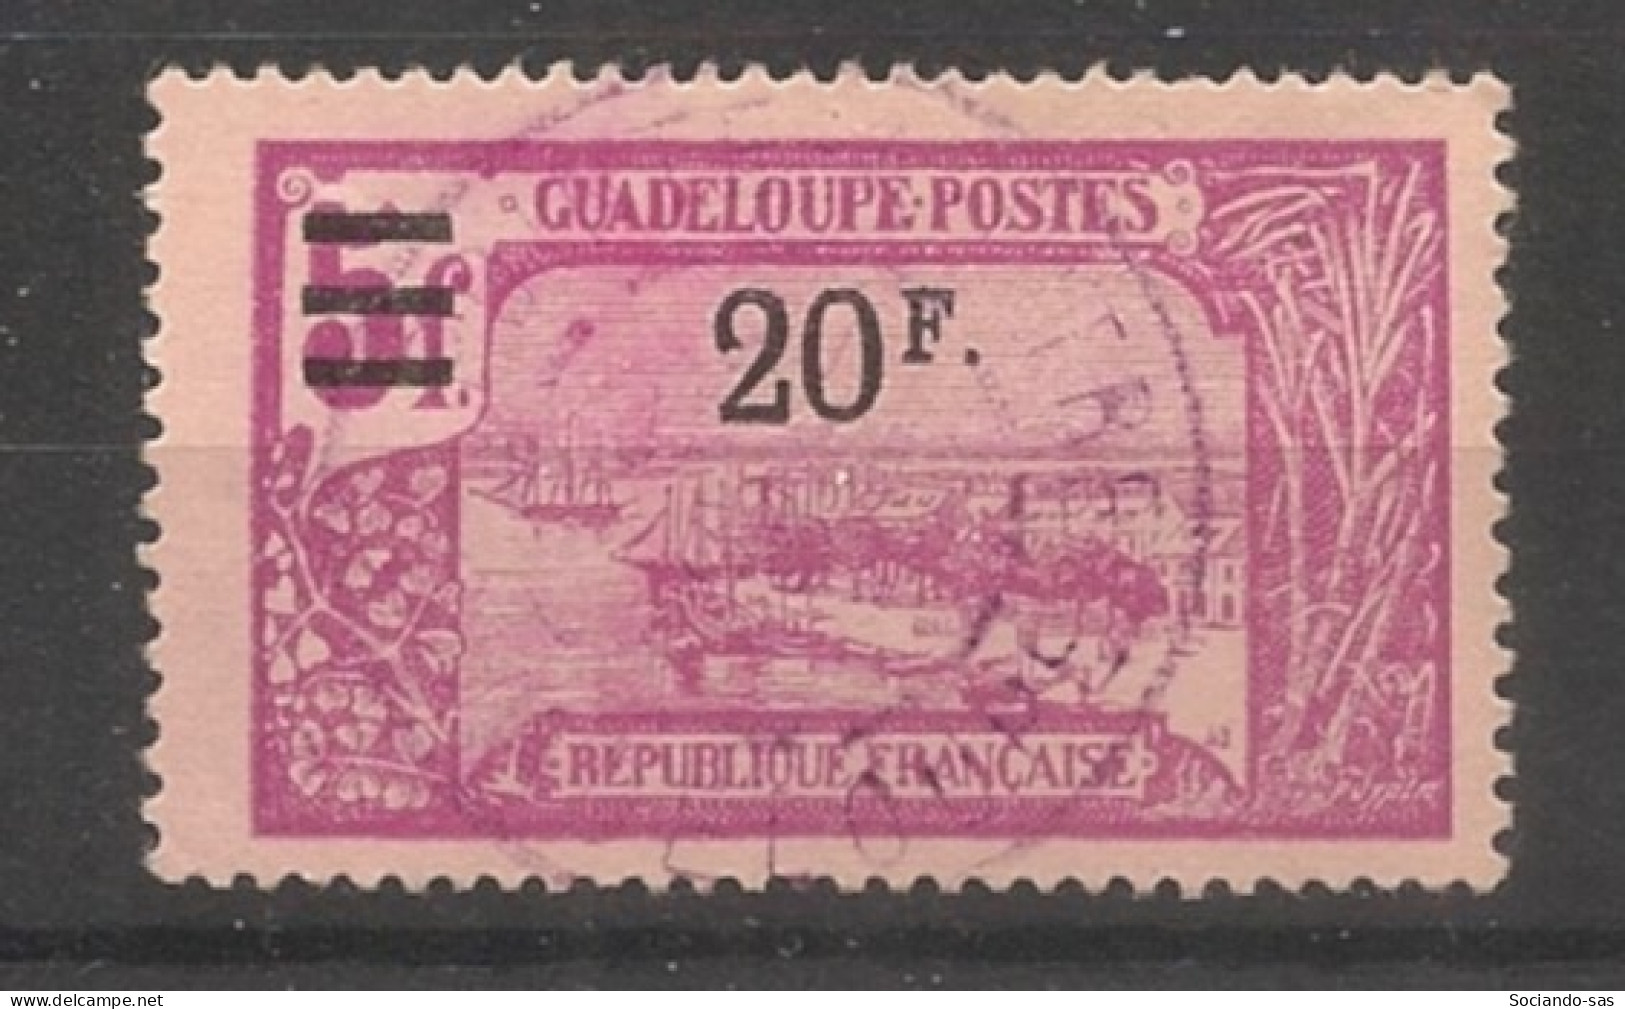 GUADELOUPE - 1924-27 - N°YT. 98 - Pointe-à-Pitre 20f Sur 5f Rose - Oblitéré / Used - Used Stamps